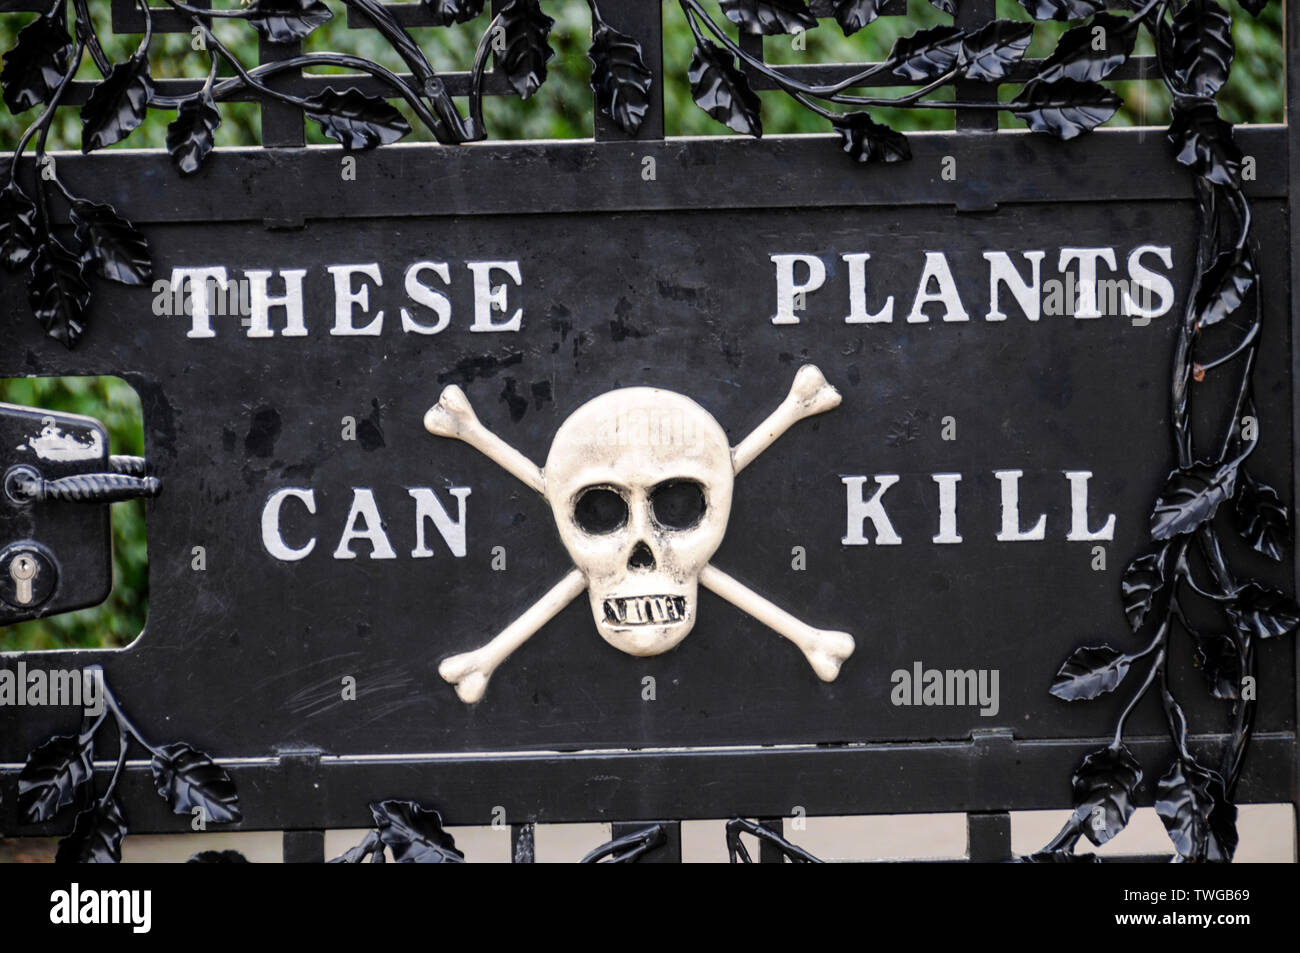 The gates with the Skull & Crossbones signs to the Poison Garden where poisonous plants are grown within the grounds of Alnwick castle at Alnwick in N Stock Photo